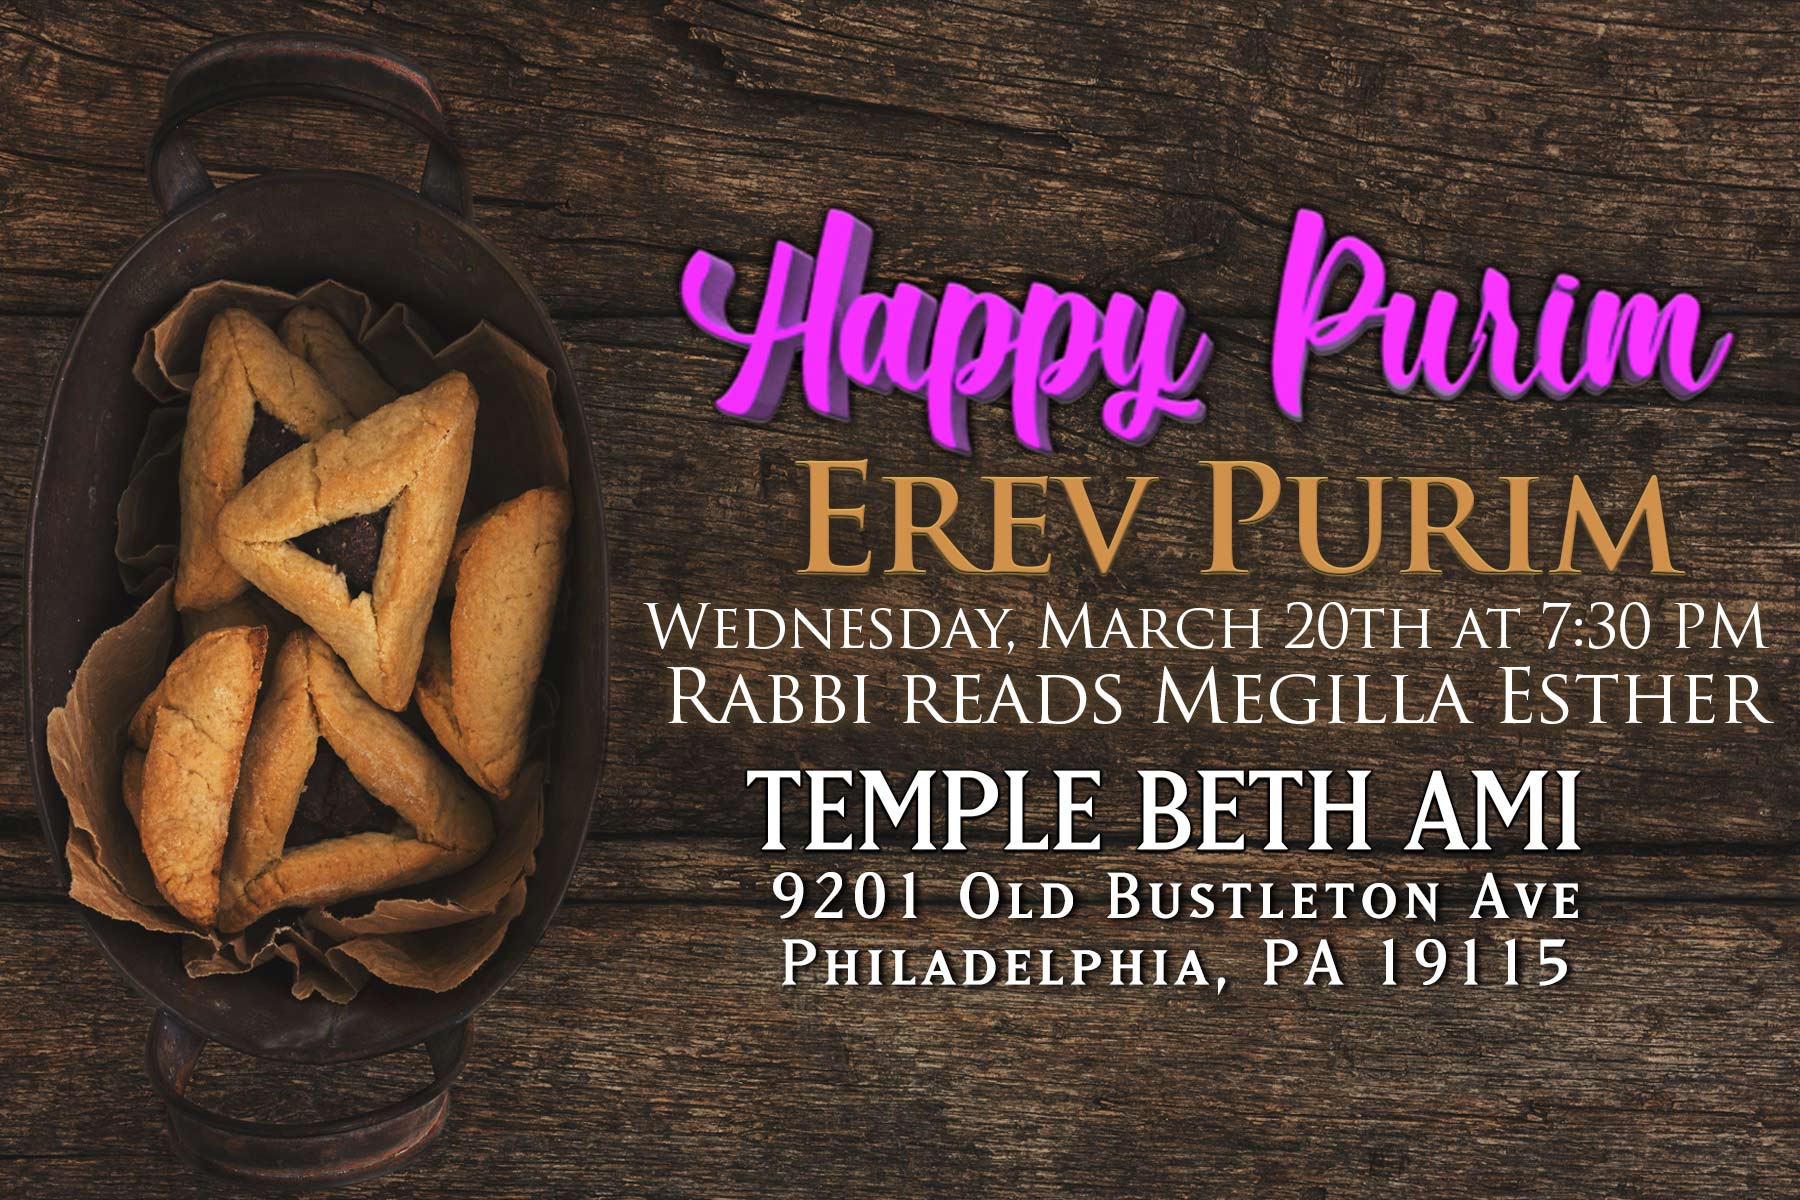 Blog #1: Purim Services 
March 20 2019